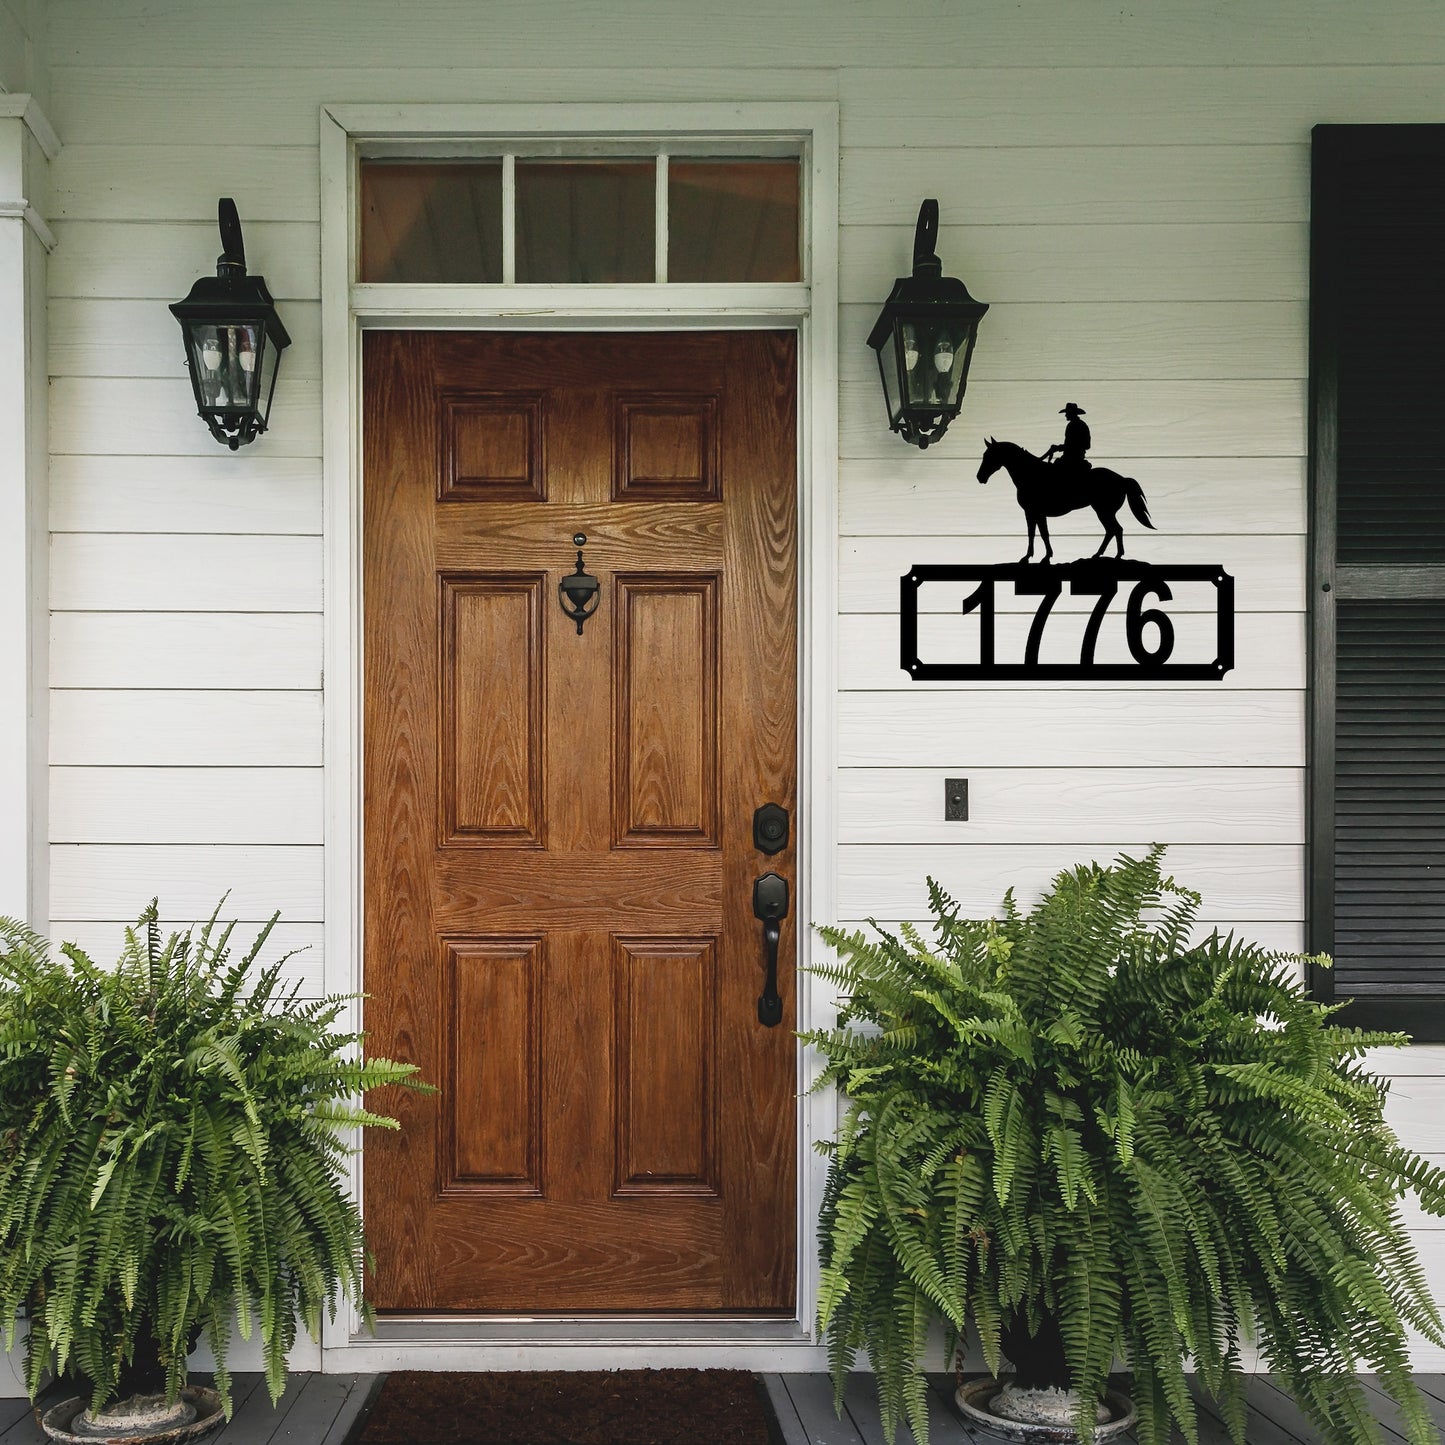 Cowboy House Numbers